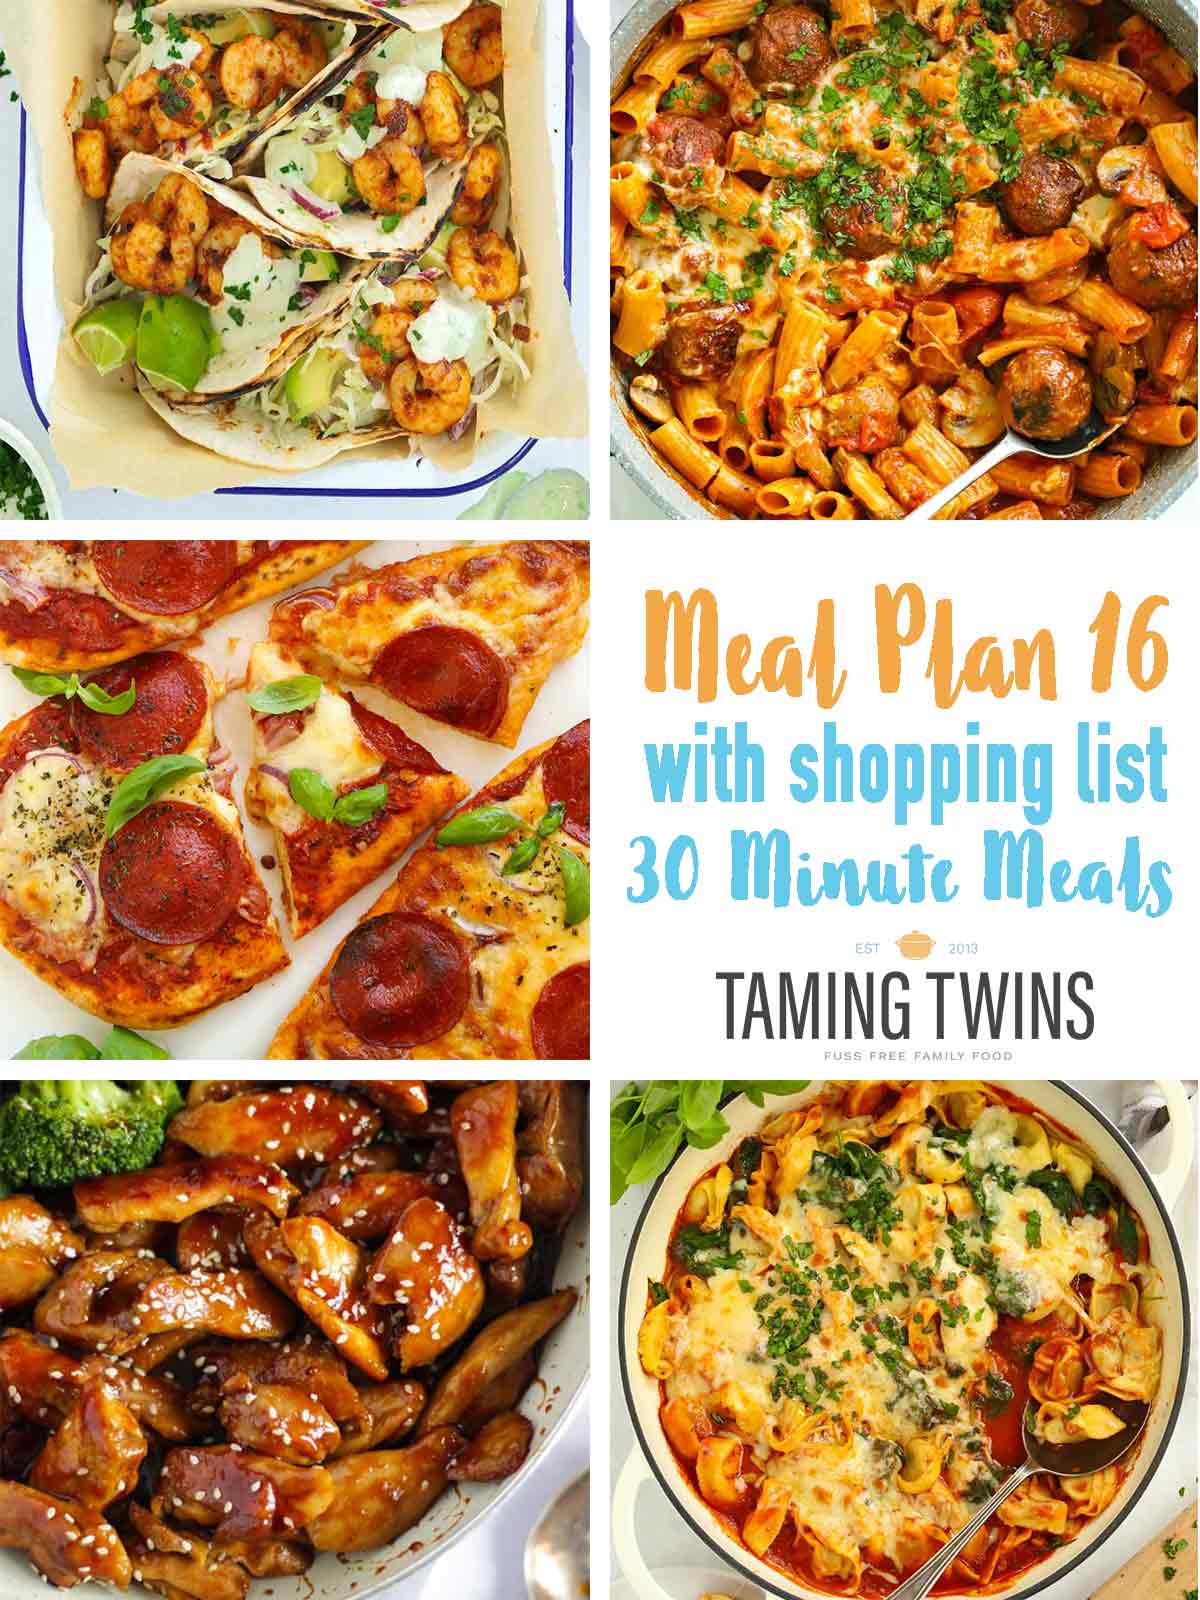 Meal plan 16 images of recipes